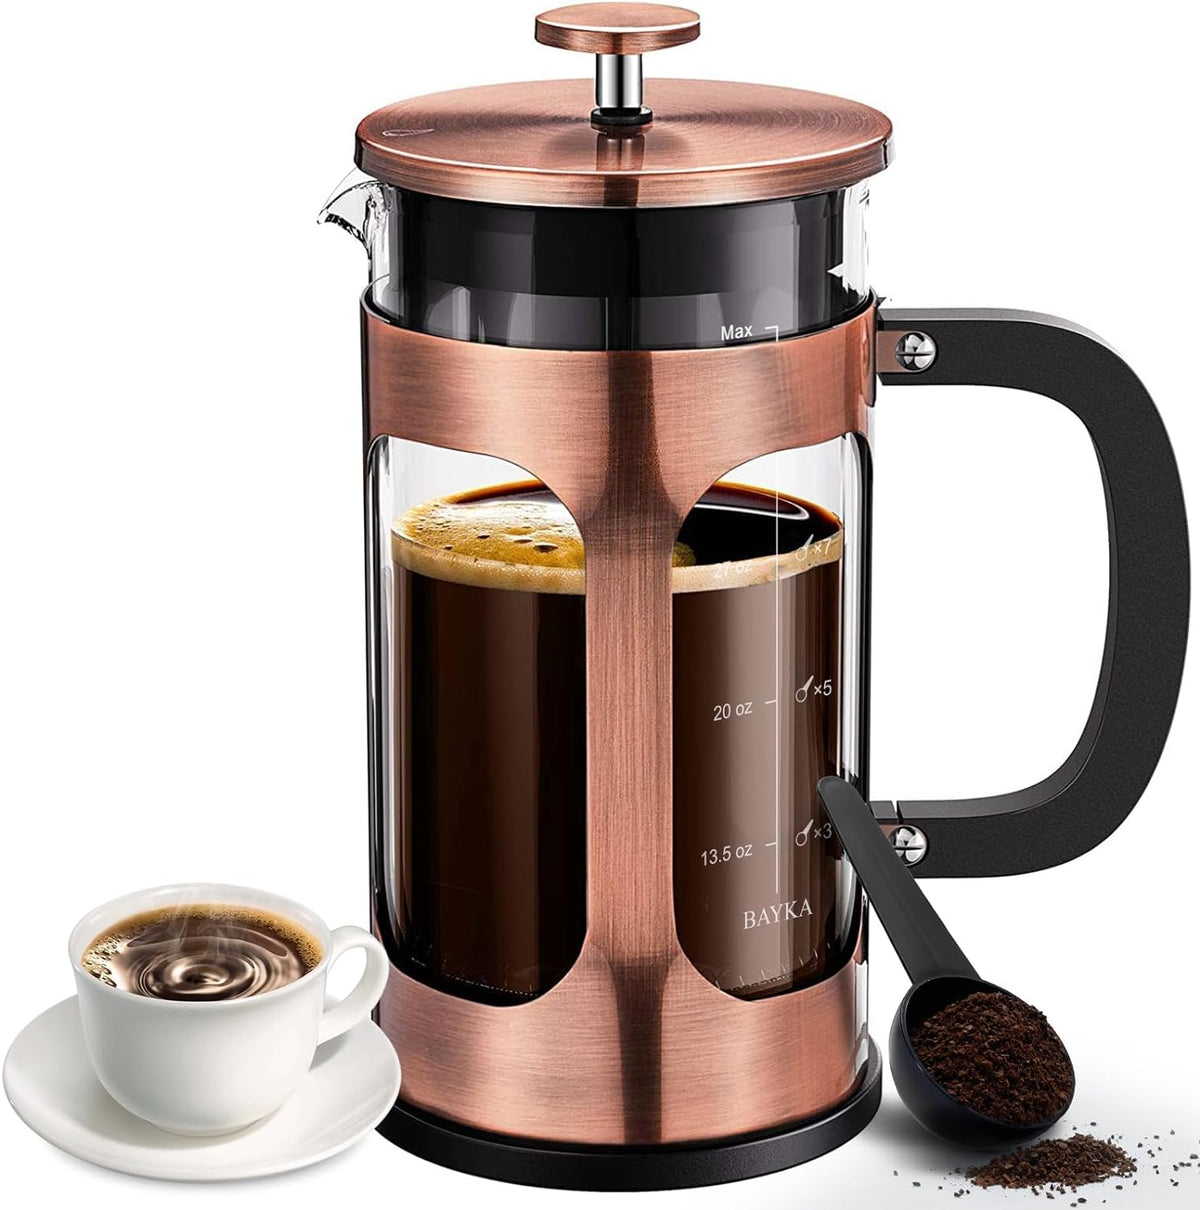 BAYKA 34 Ounce 1 Liter French Press Coffee Maker-Copper